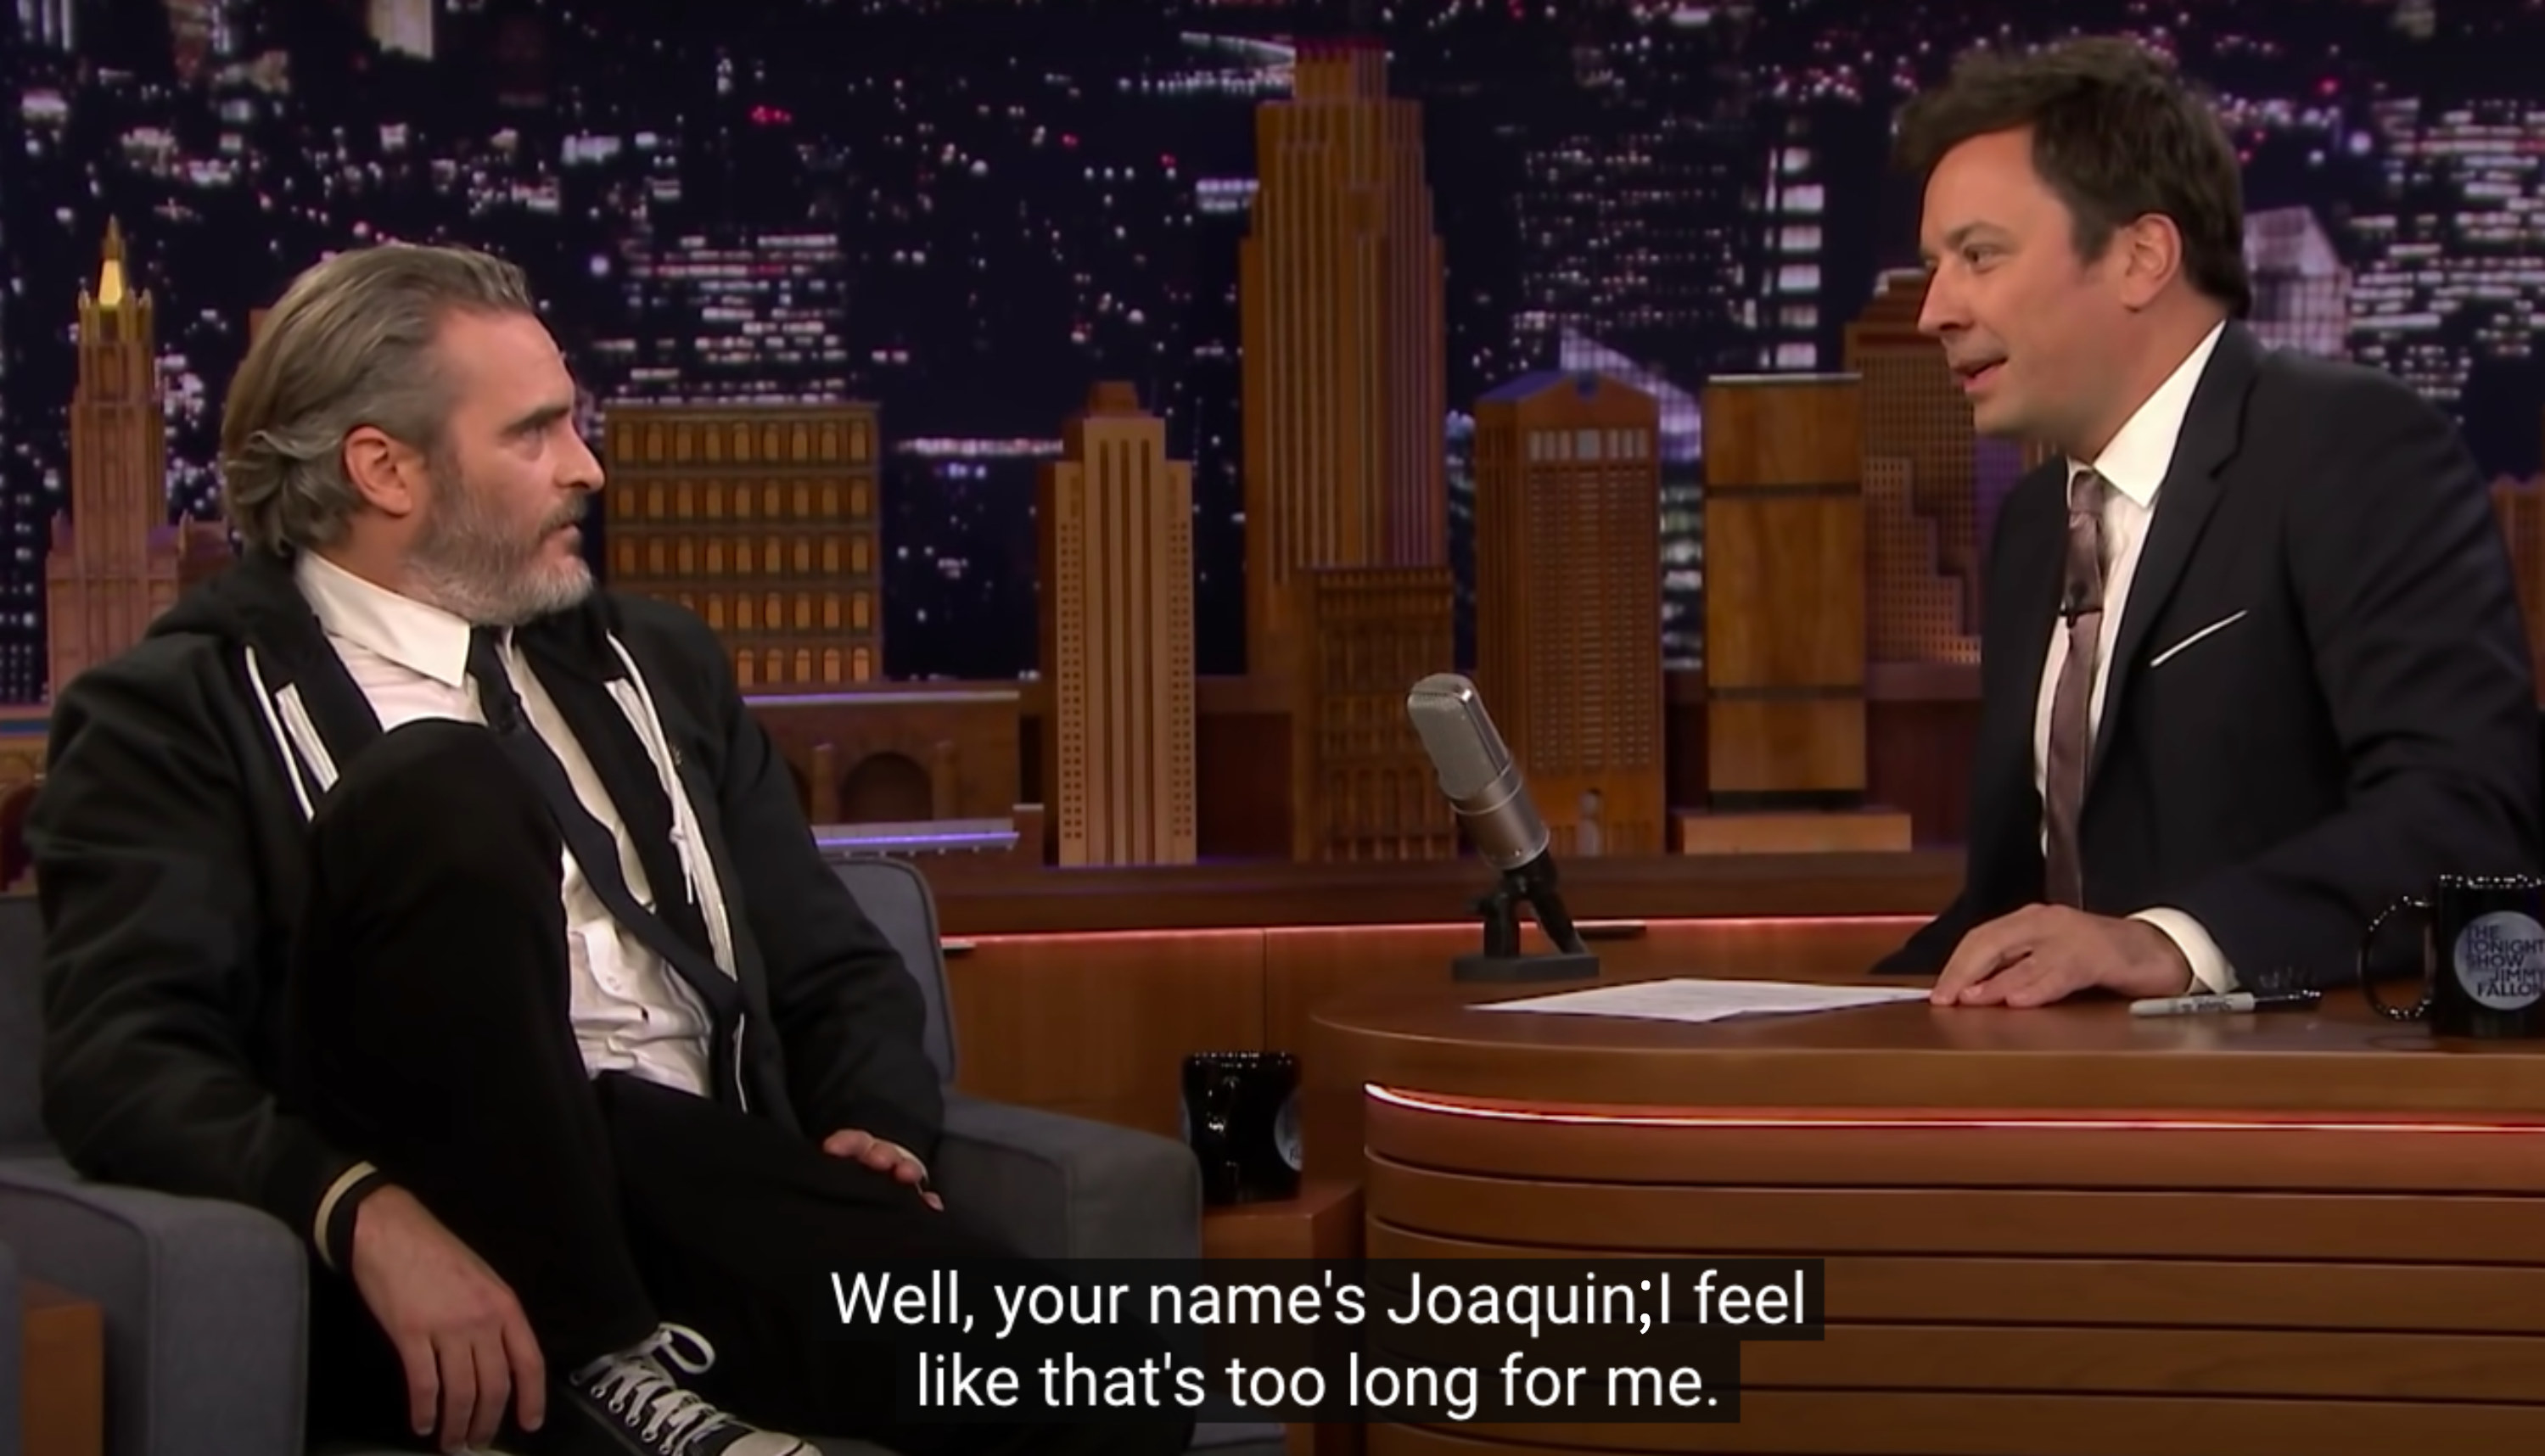 Jimmy: &quot;Well, your name&#x27;s Joaquin; I feel like that&#x27;s too long for me&quot;